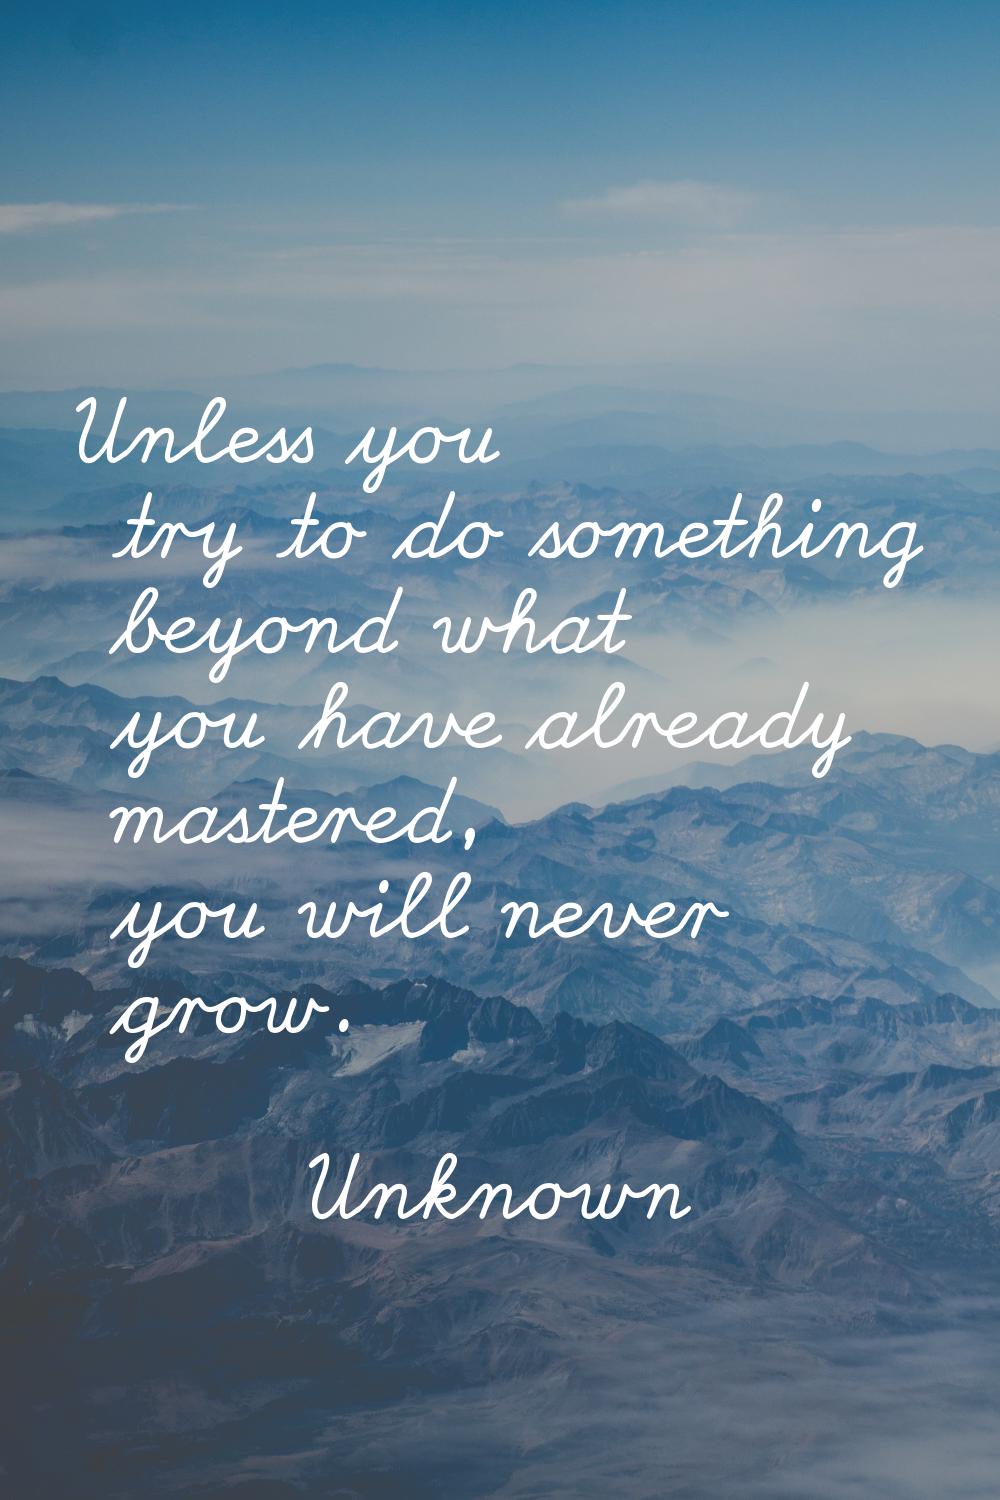 Unless you try to do something beyond what you have already mastered, you will never grow.